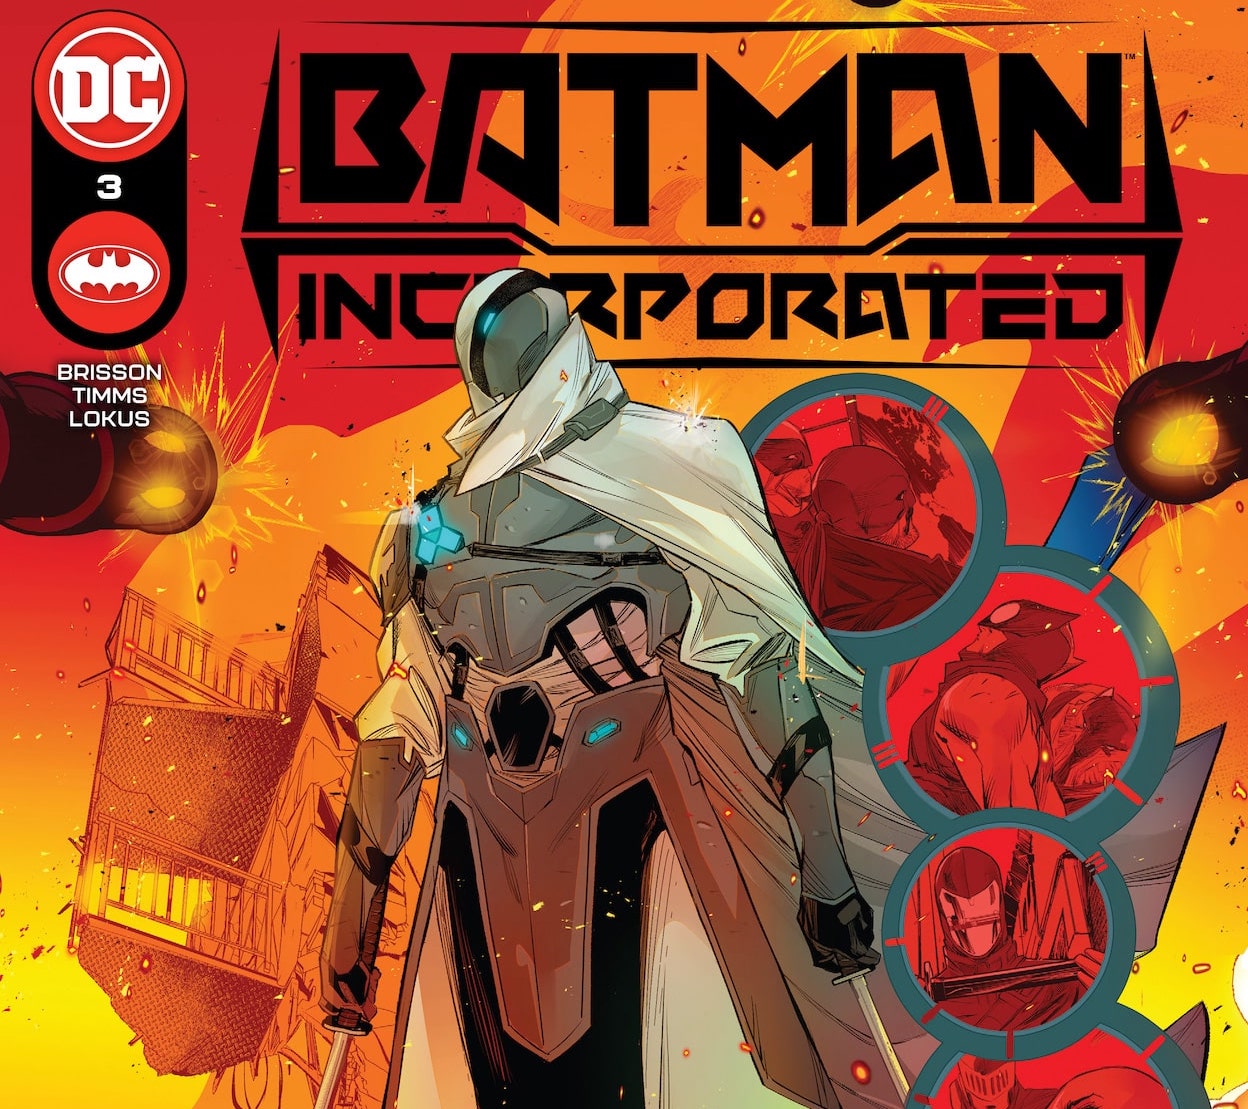 'Batman Incorporated' #3 reveals a different take on the sidekick experience